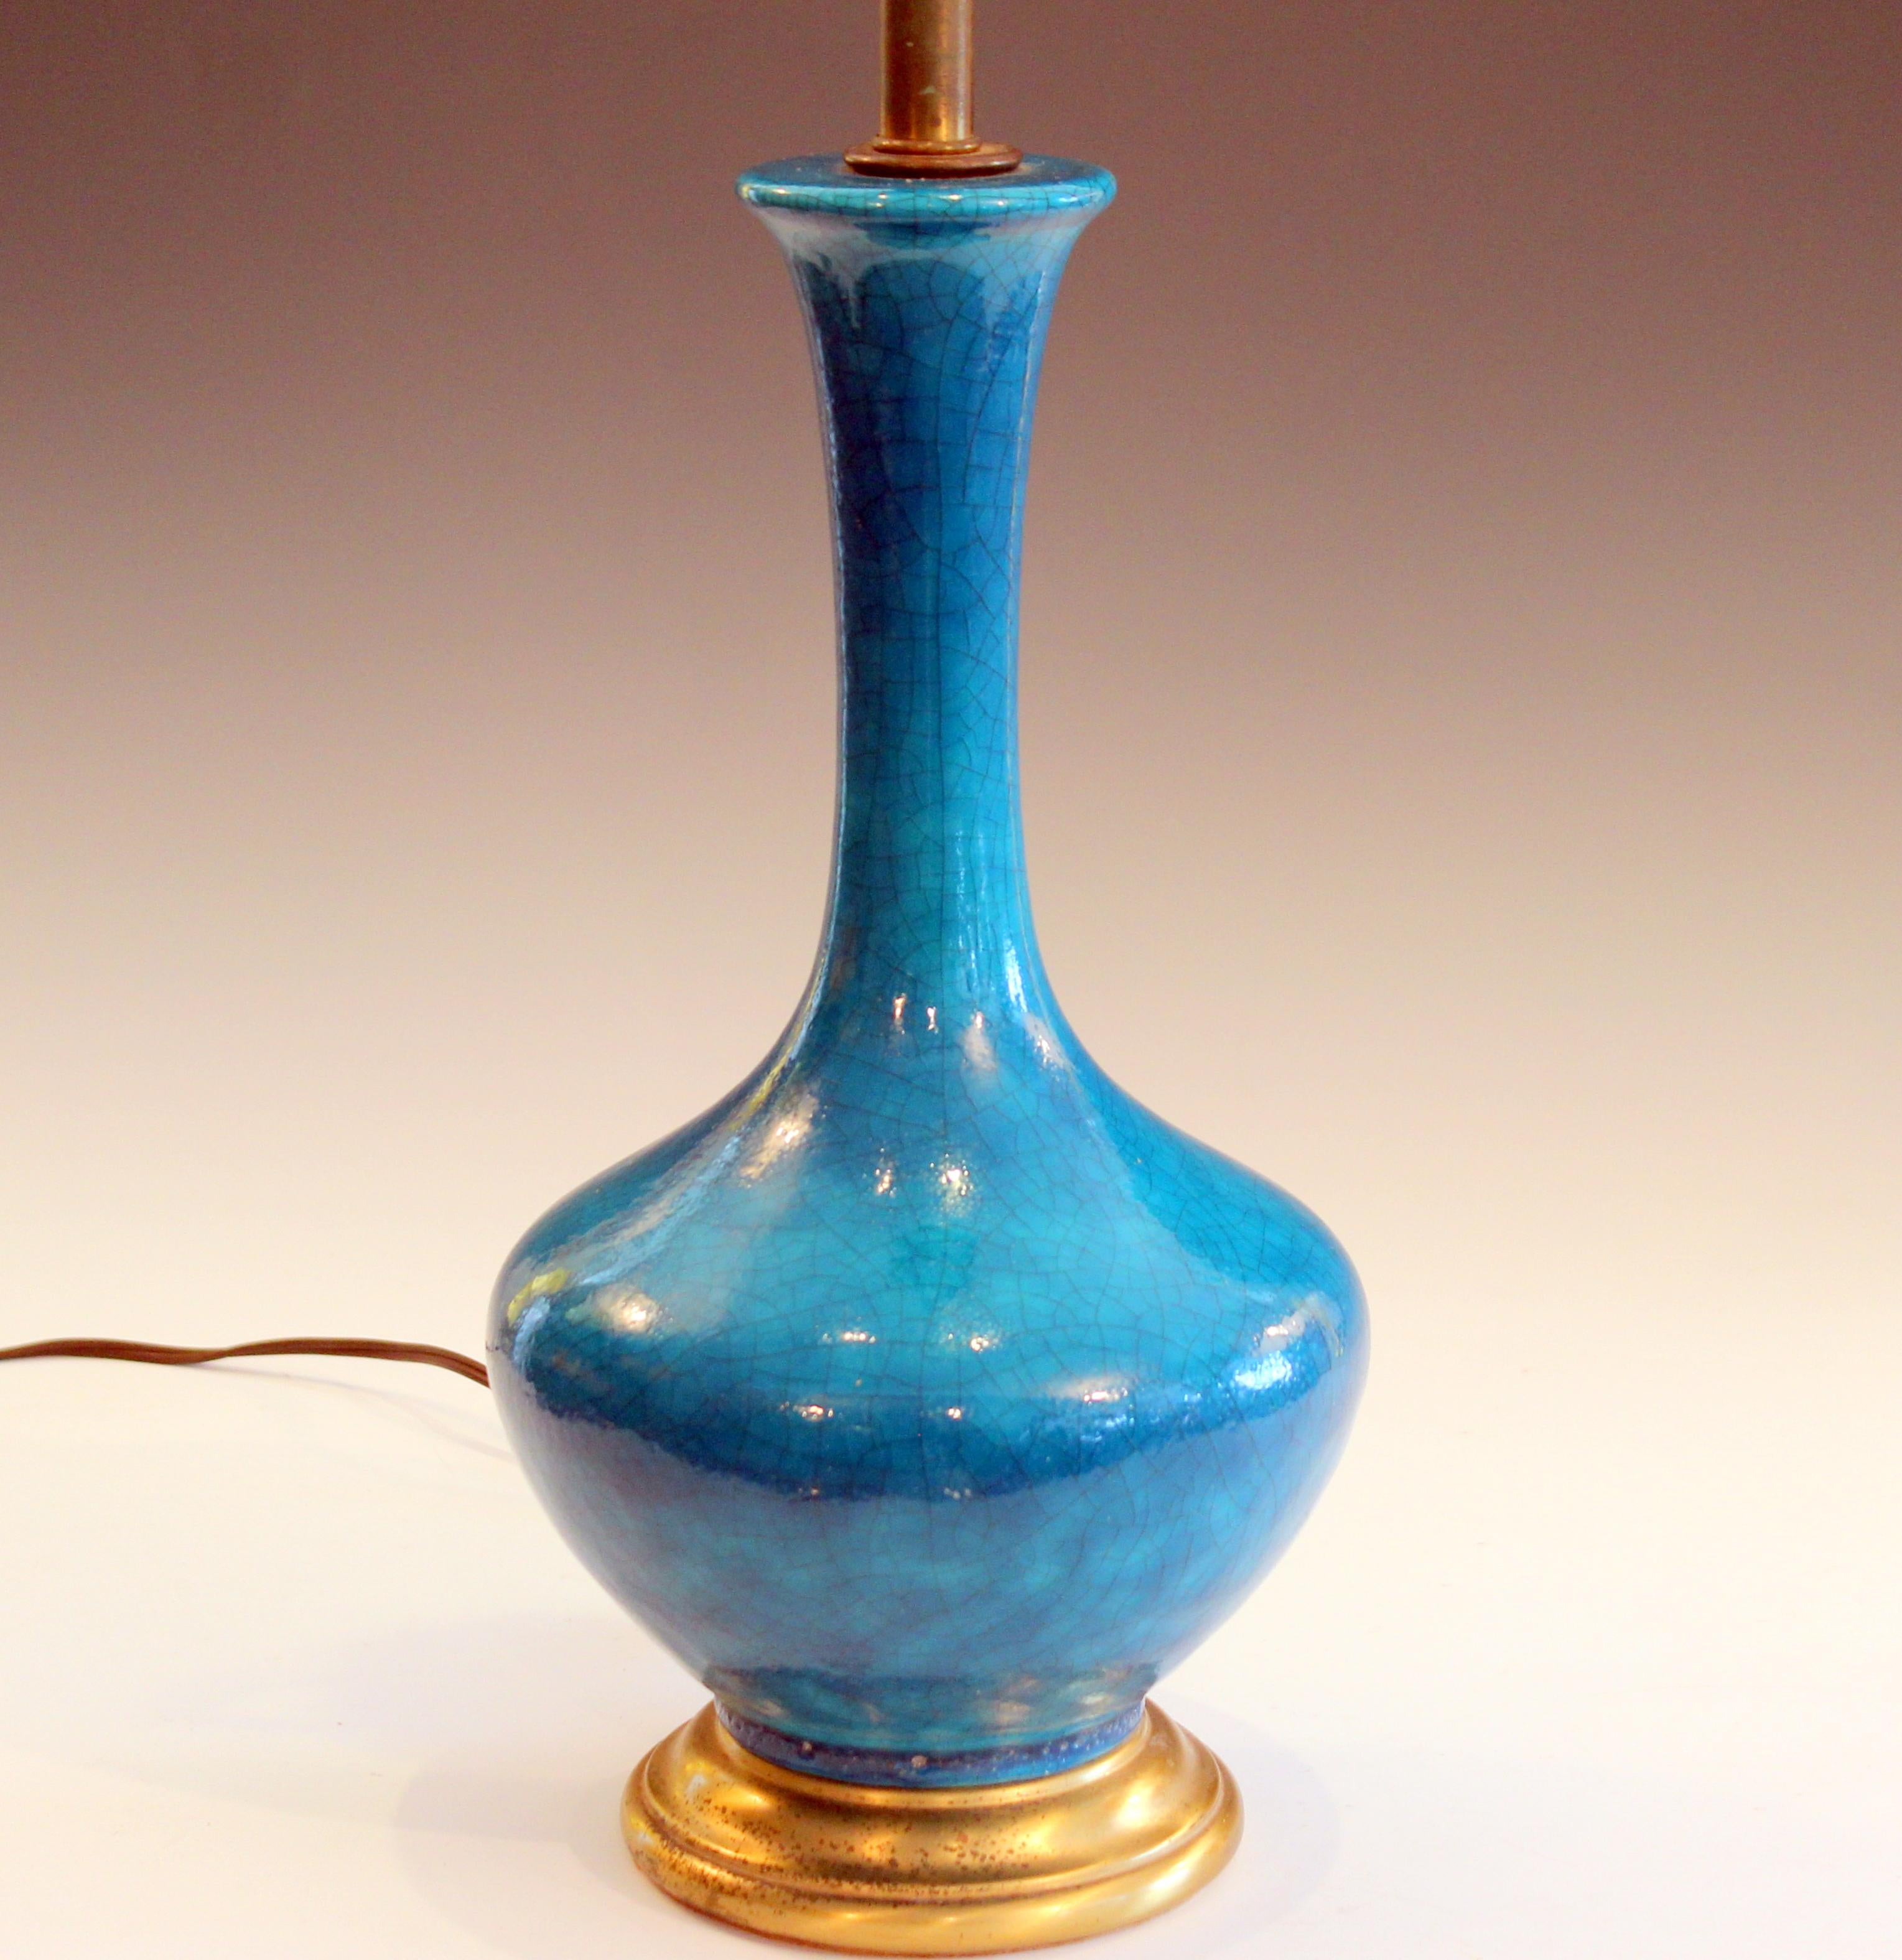 North American Vintage Art Pottery Lamp Old Turquoise Art Deco Egyptian Revival Crackle Glaze